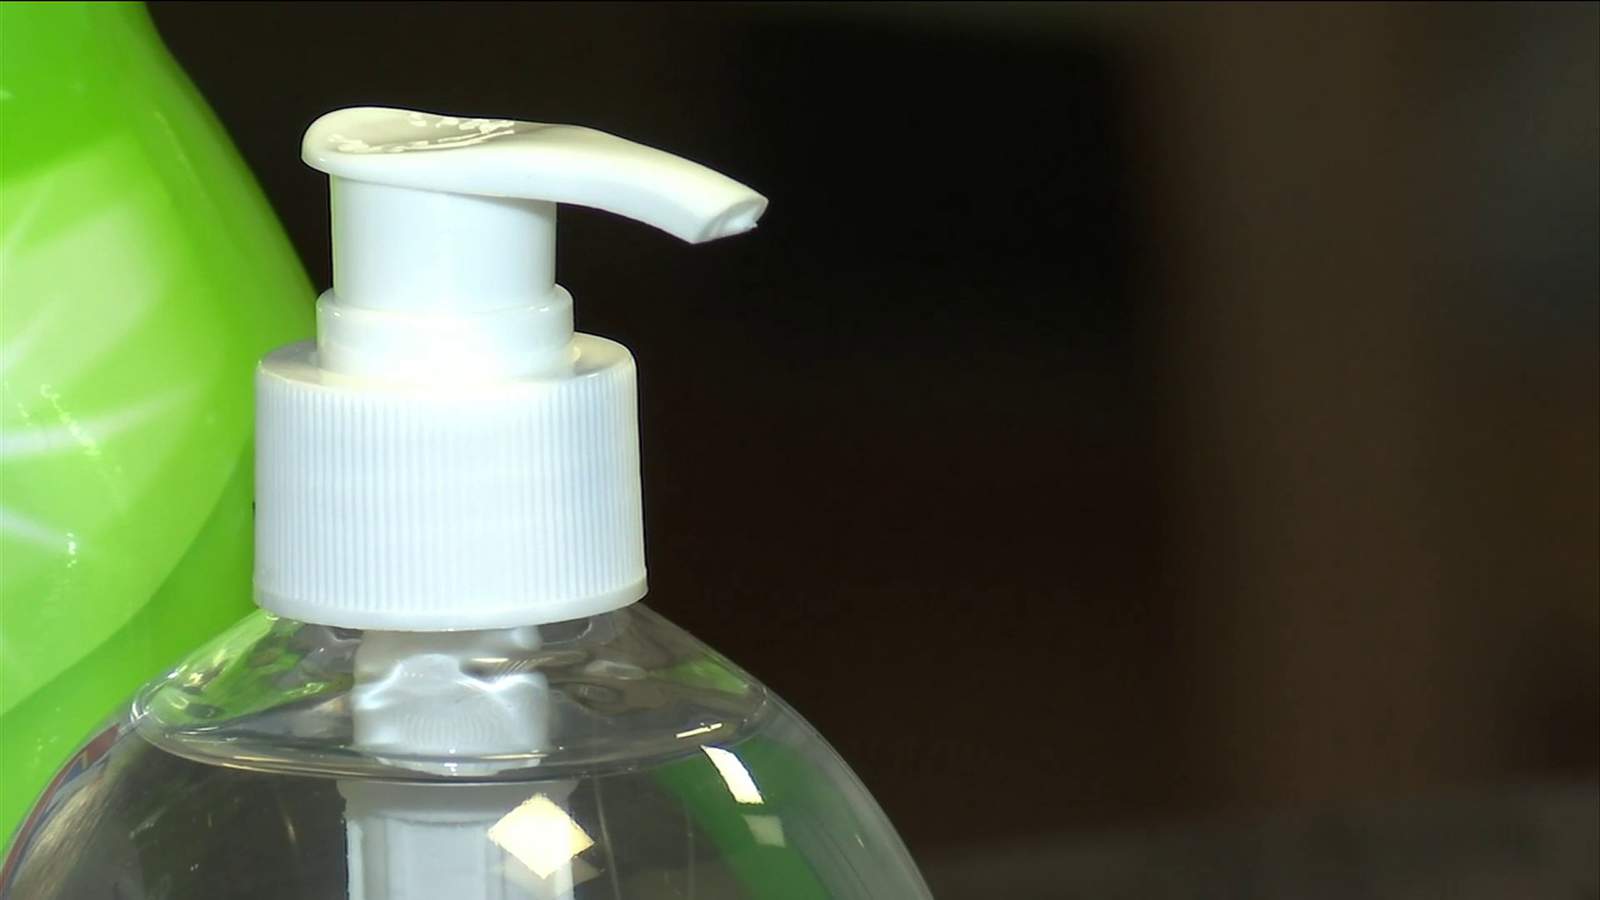 75 hand sanitizers on FDA’s updated list of toxic products